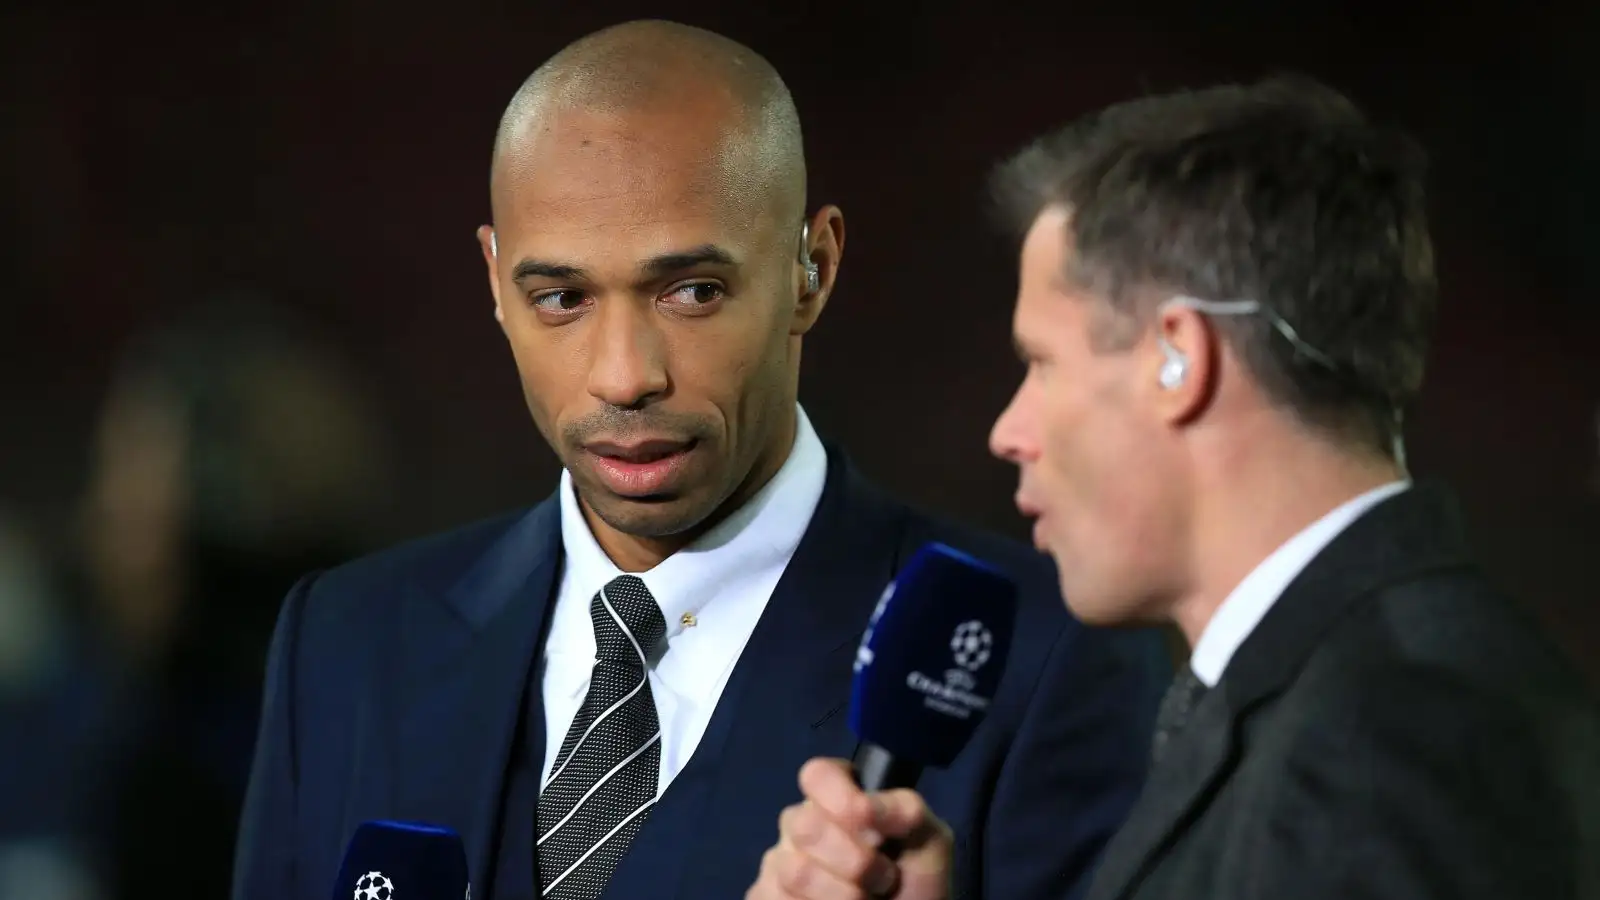 Arsenal legend Thierry Henry claims Raheem Sterling 'didn't look